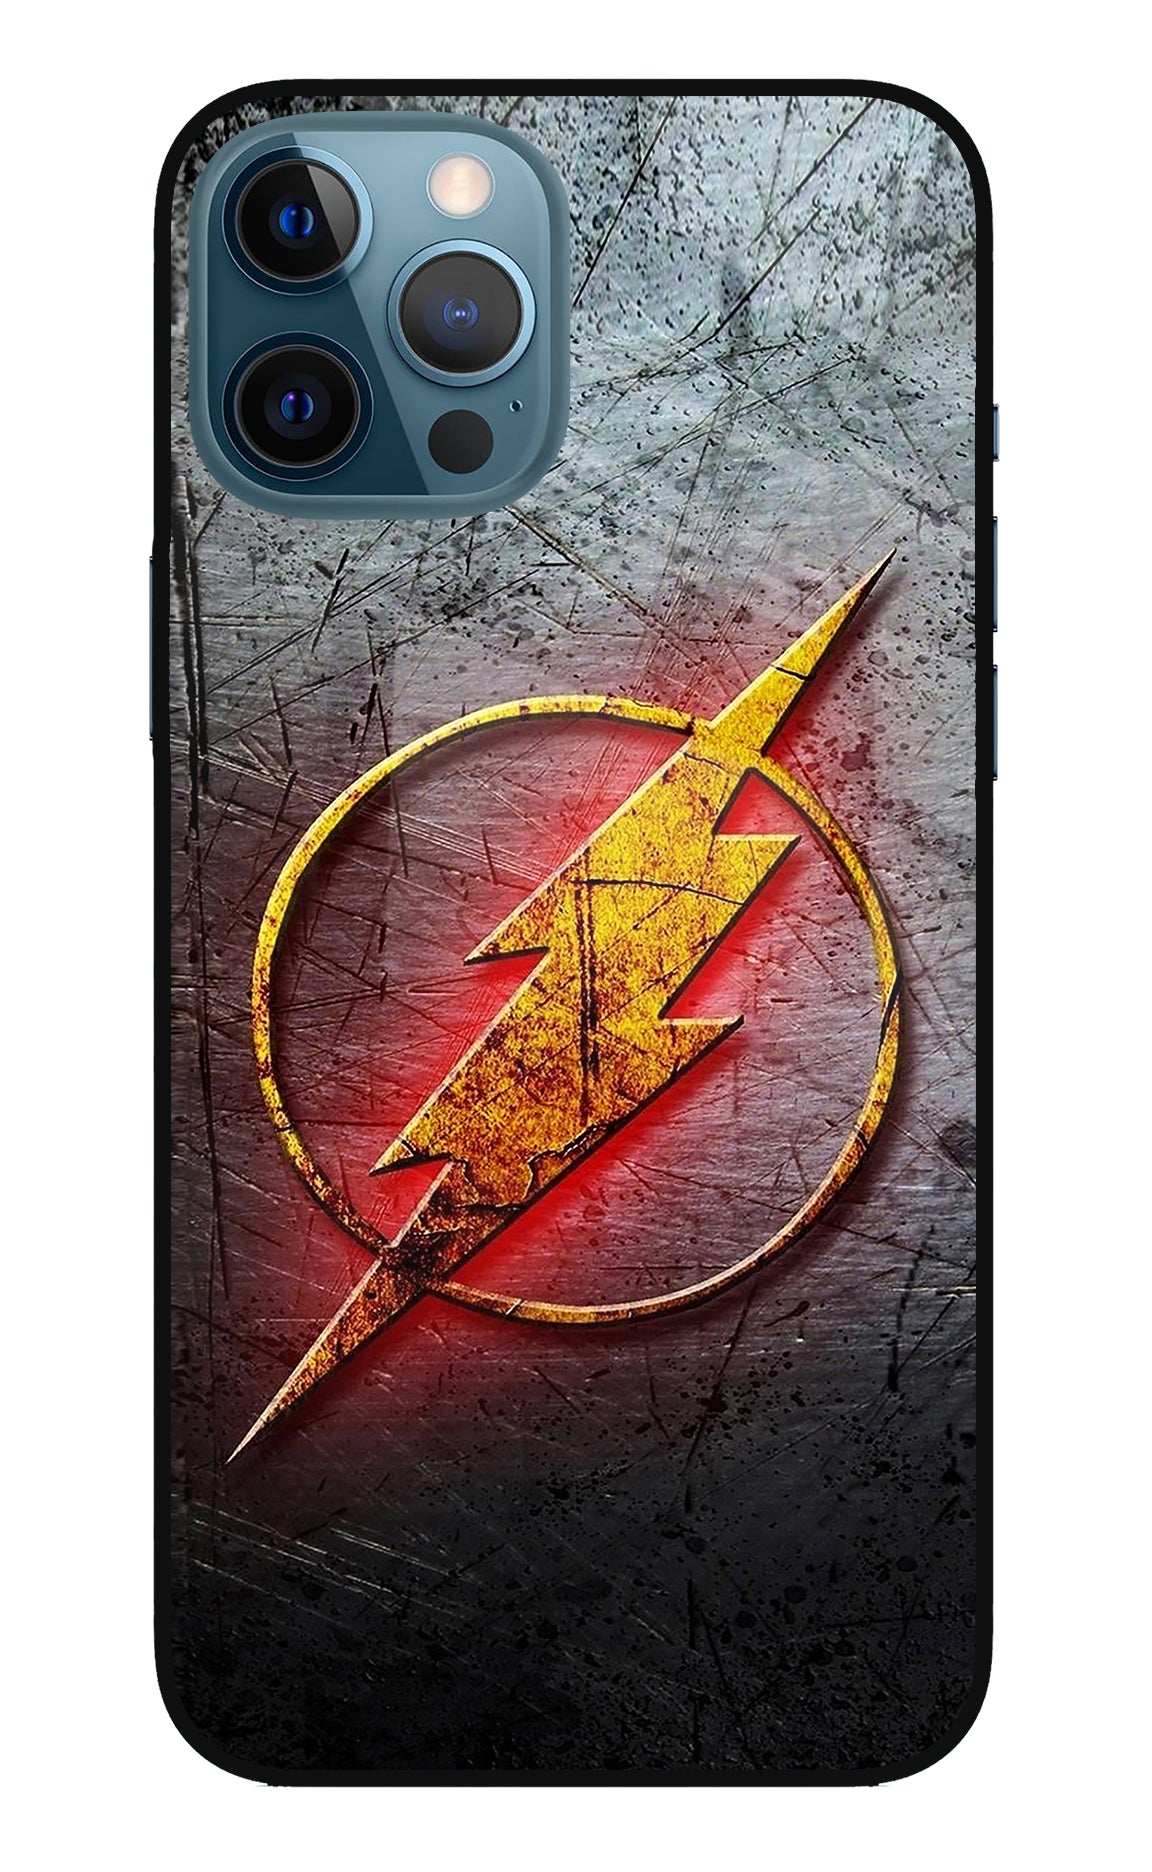 Flash iPhone 12 Pro Max Back Cover